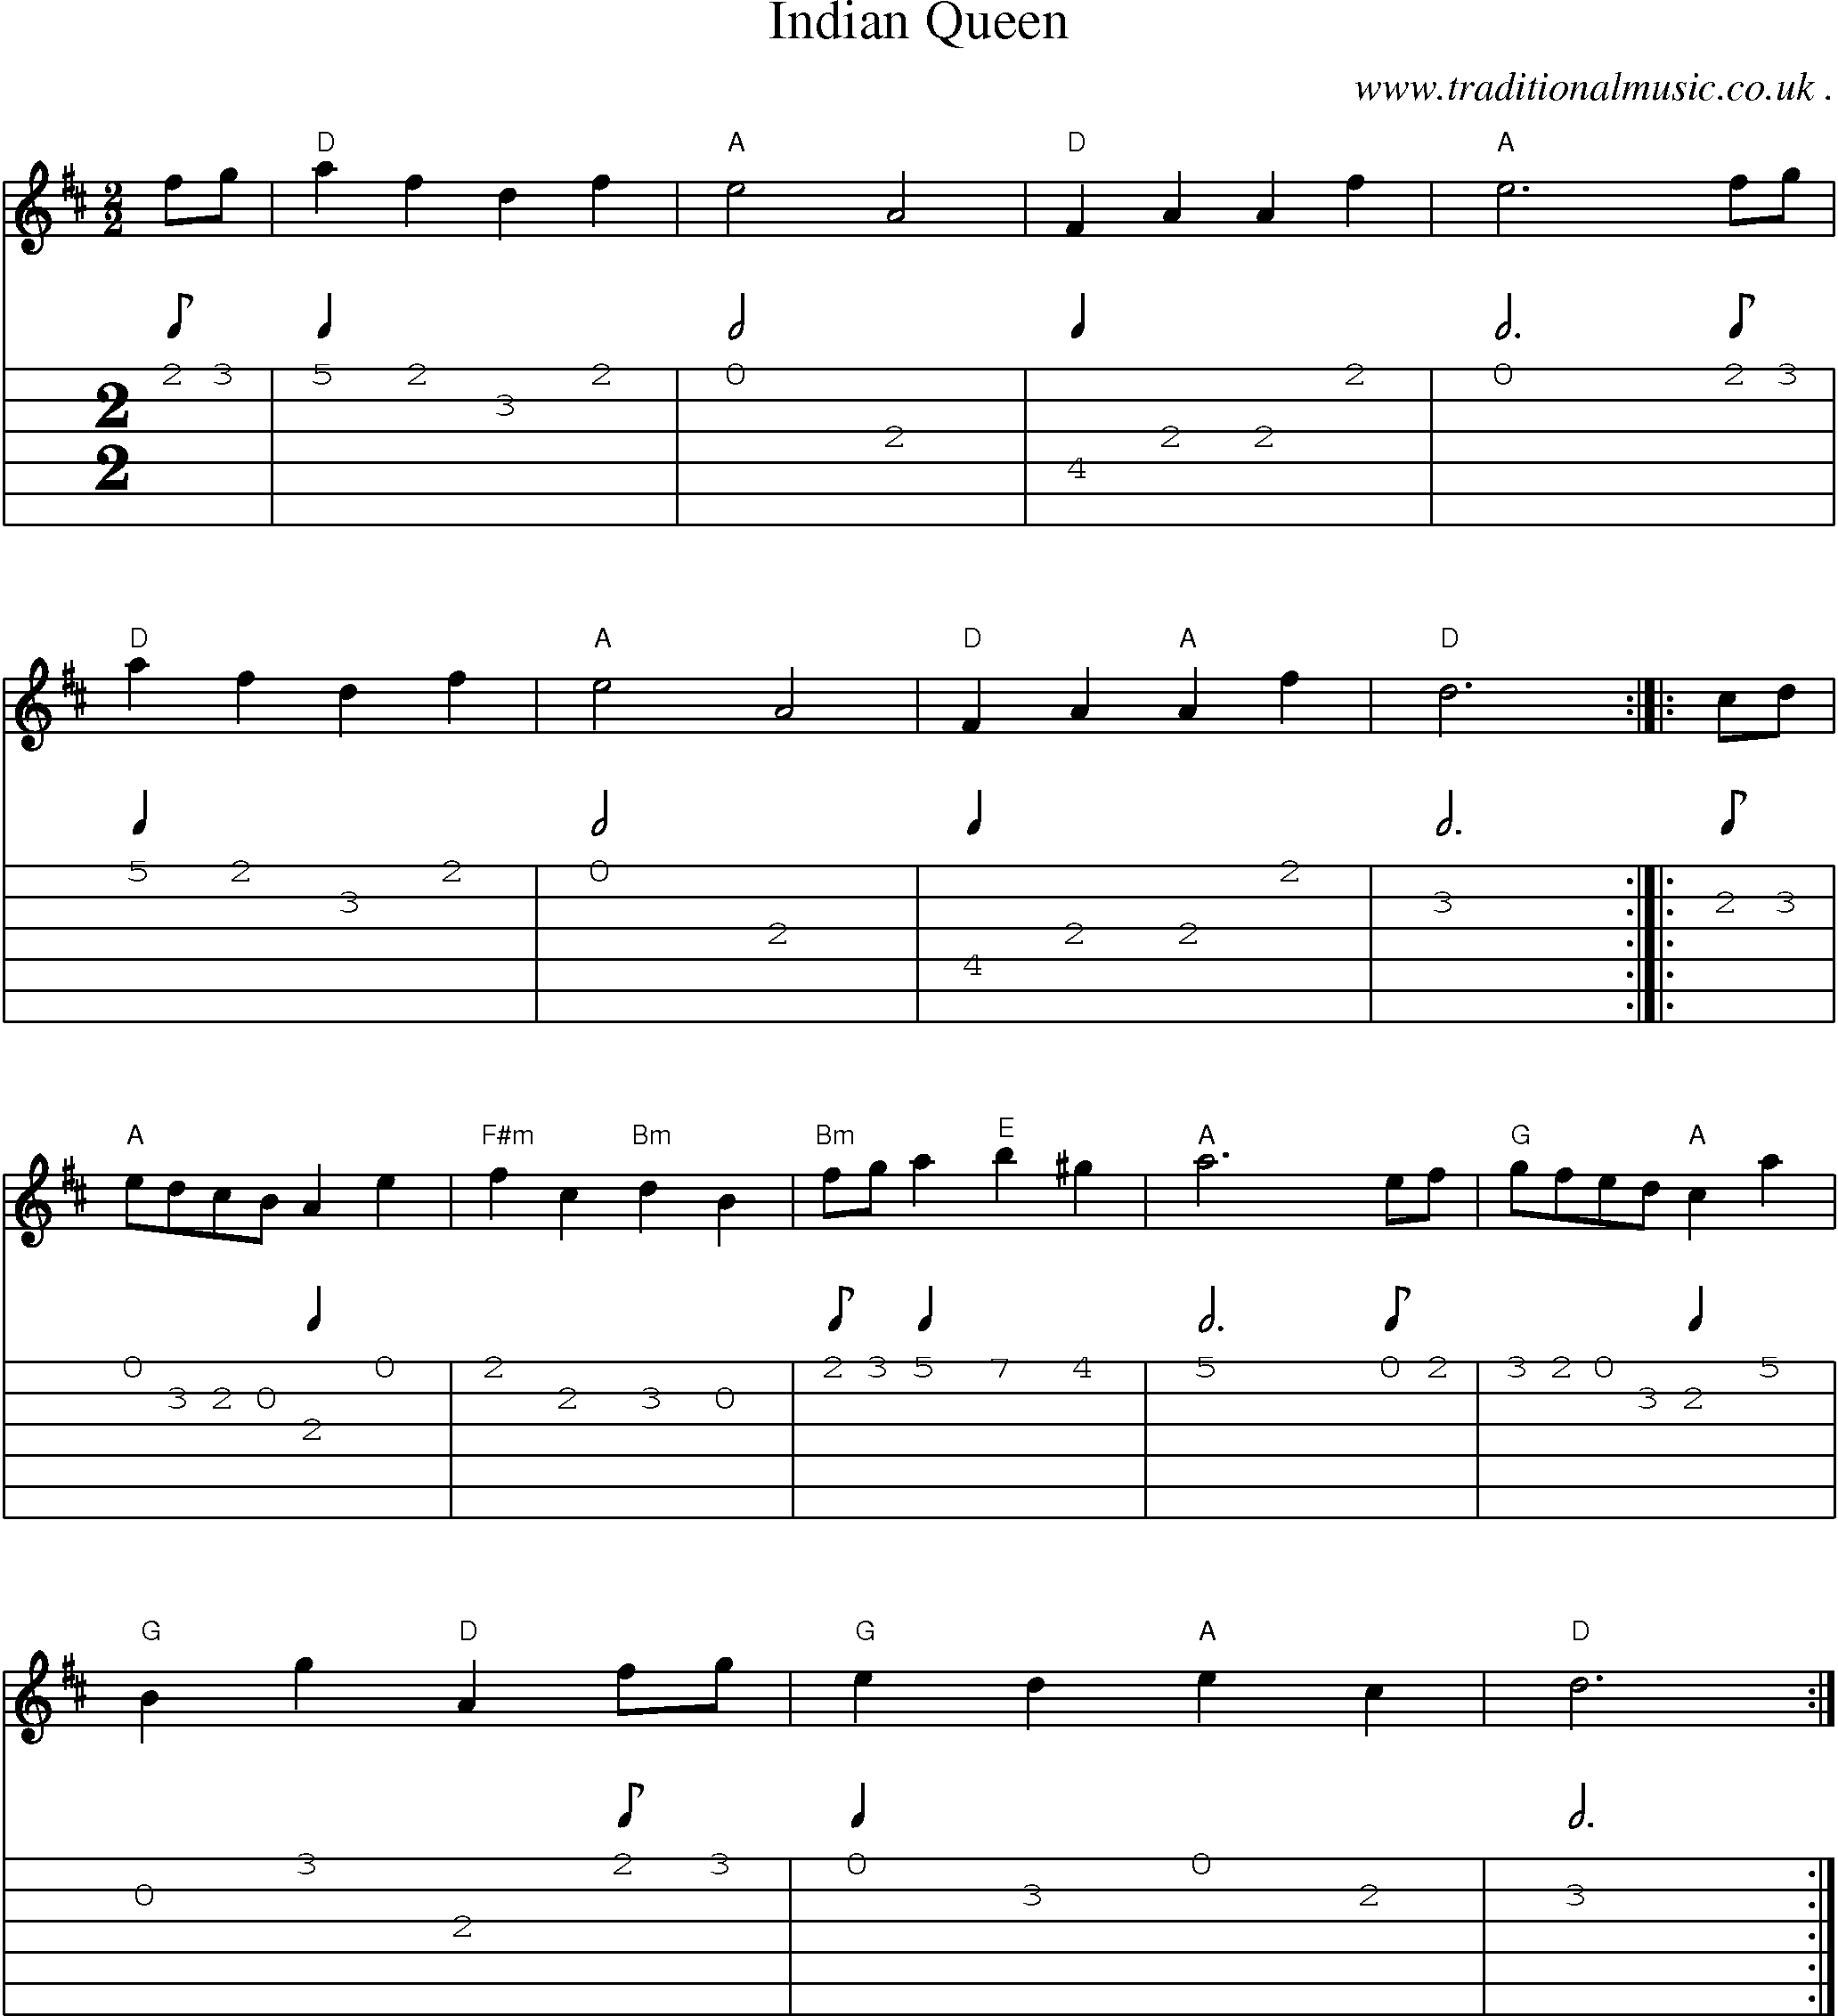 Music Score and Guitar Tabs for Indian Queen